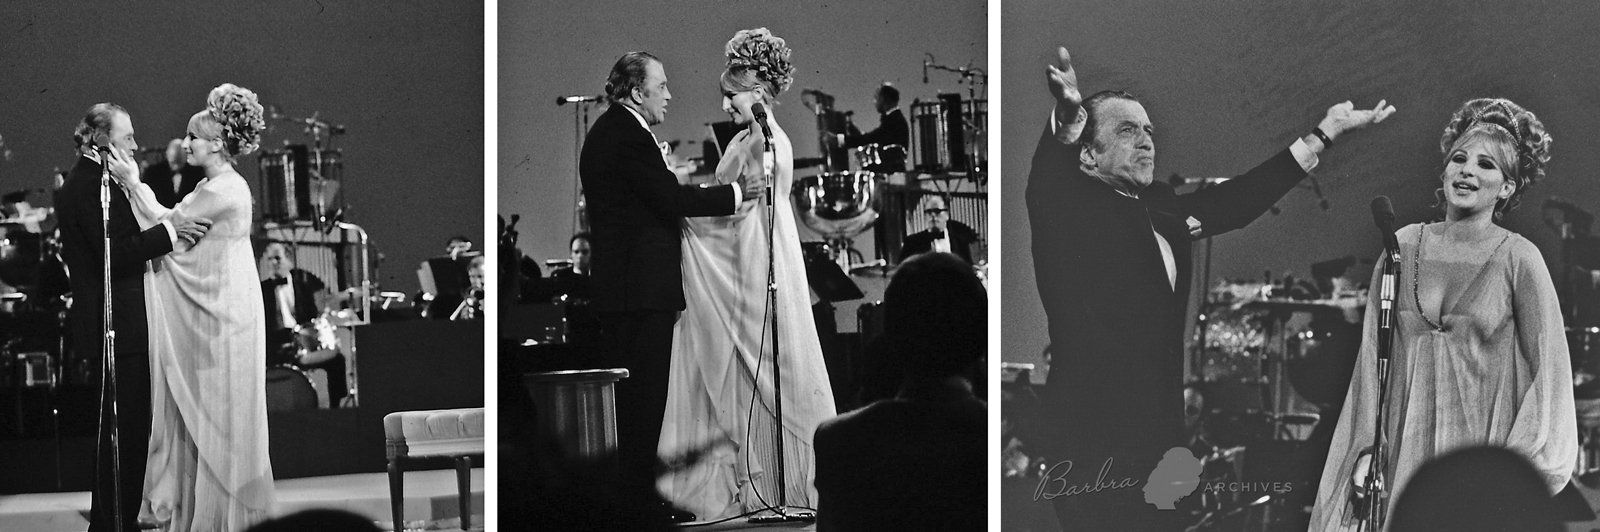 Three photos of Ed Sullivan and Barbra Streisand on stage together in 1969.